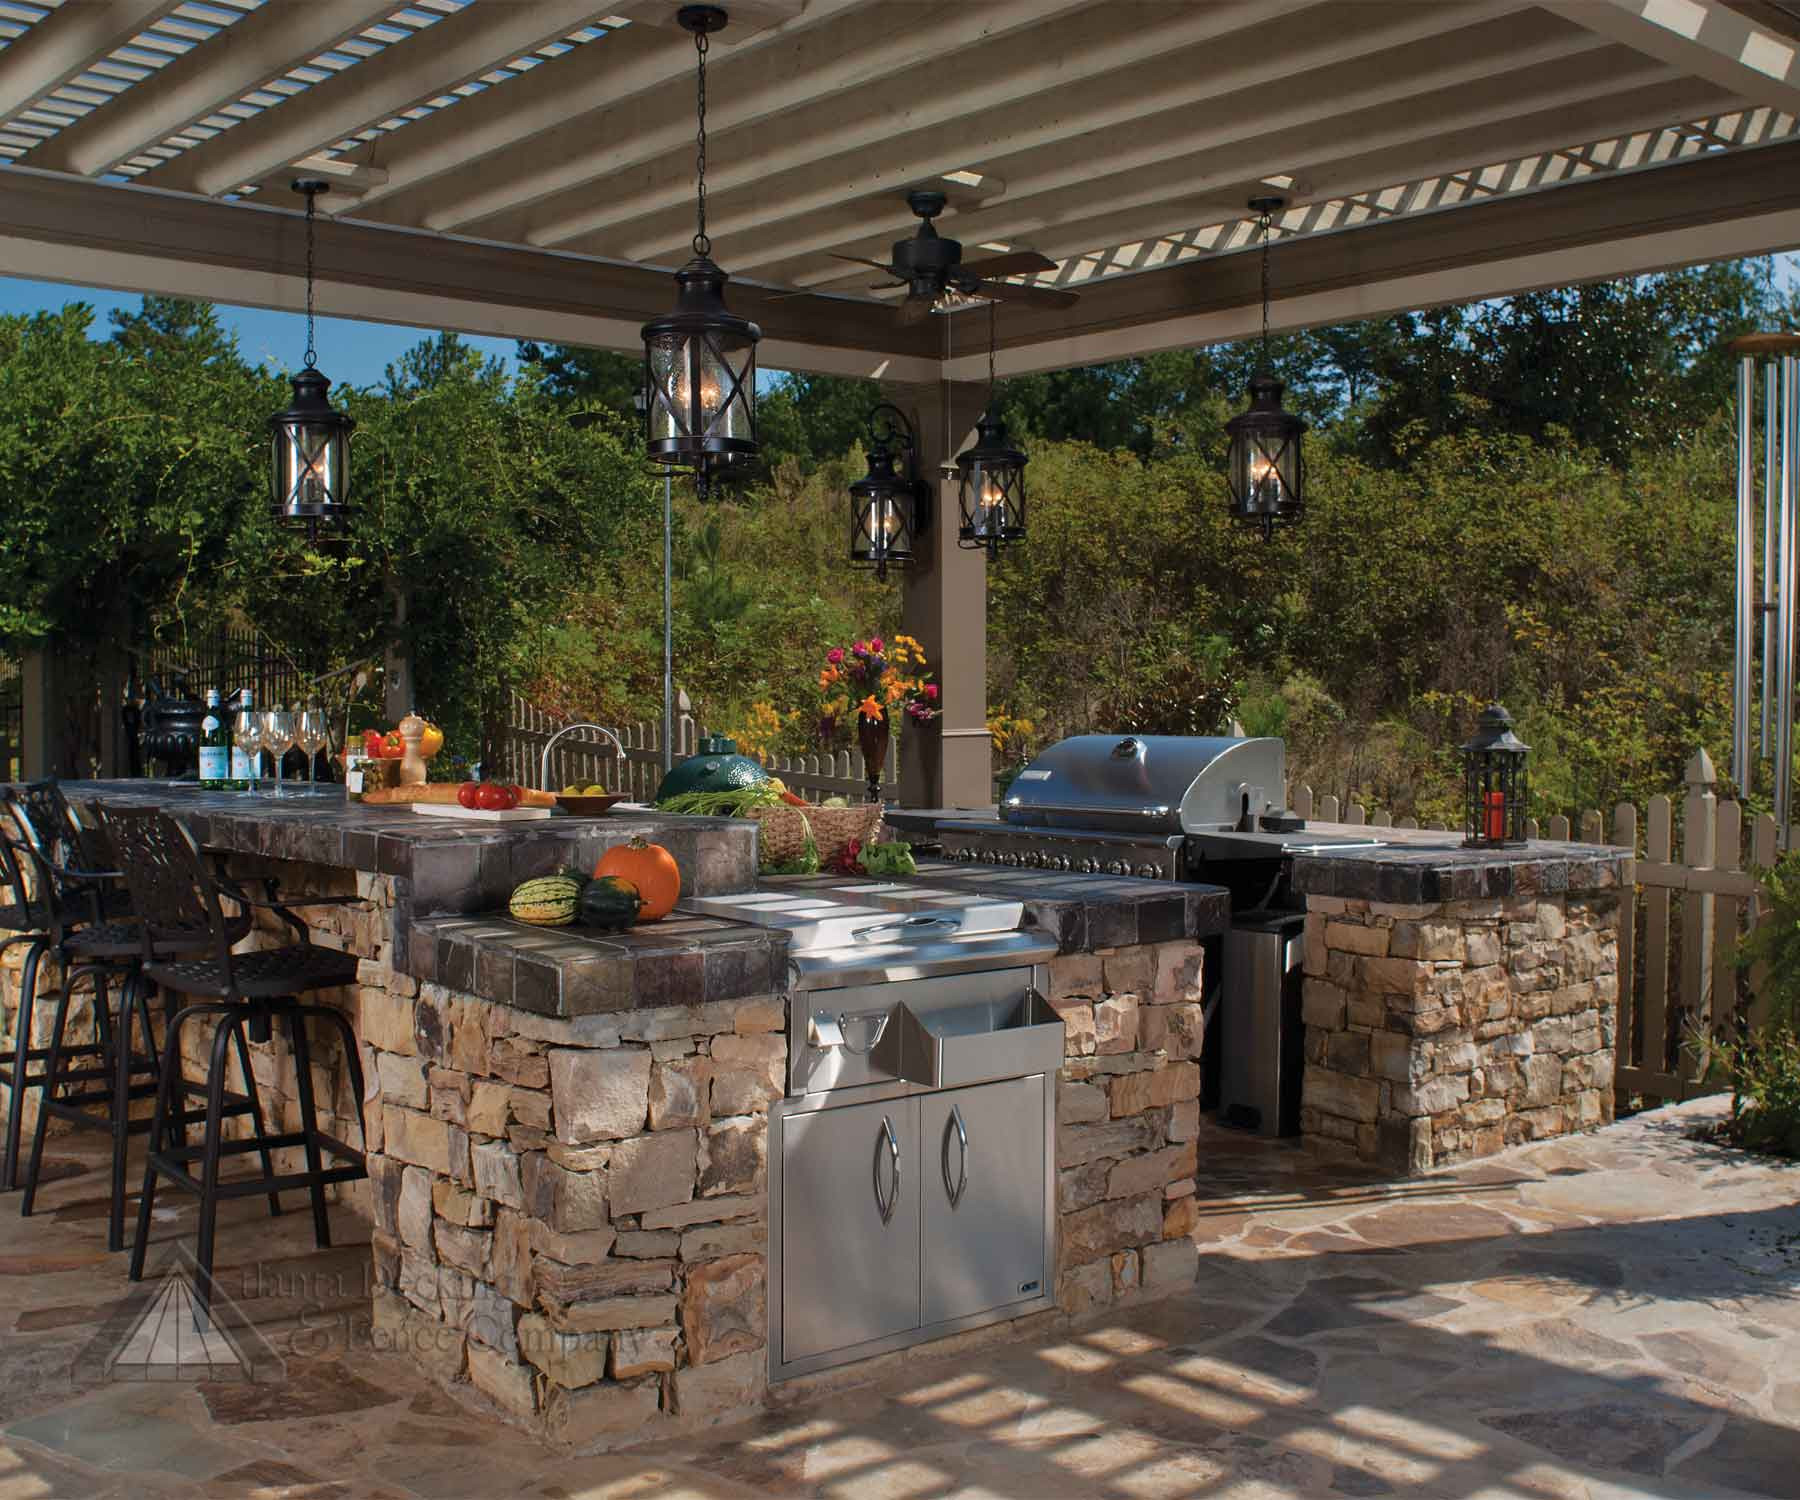 Outdoor Kitchens Ideas
 Outdoor Kitchen Designing The Perfect Backyard Cooking